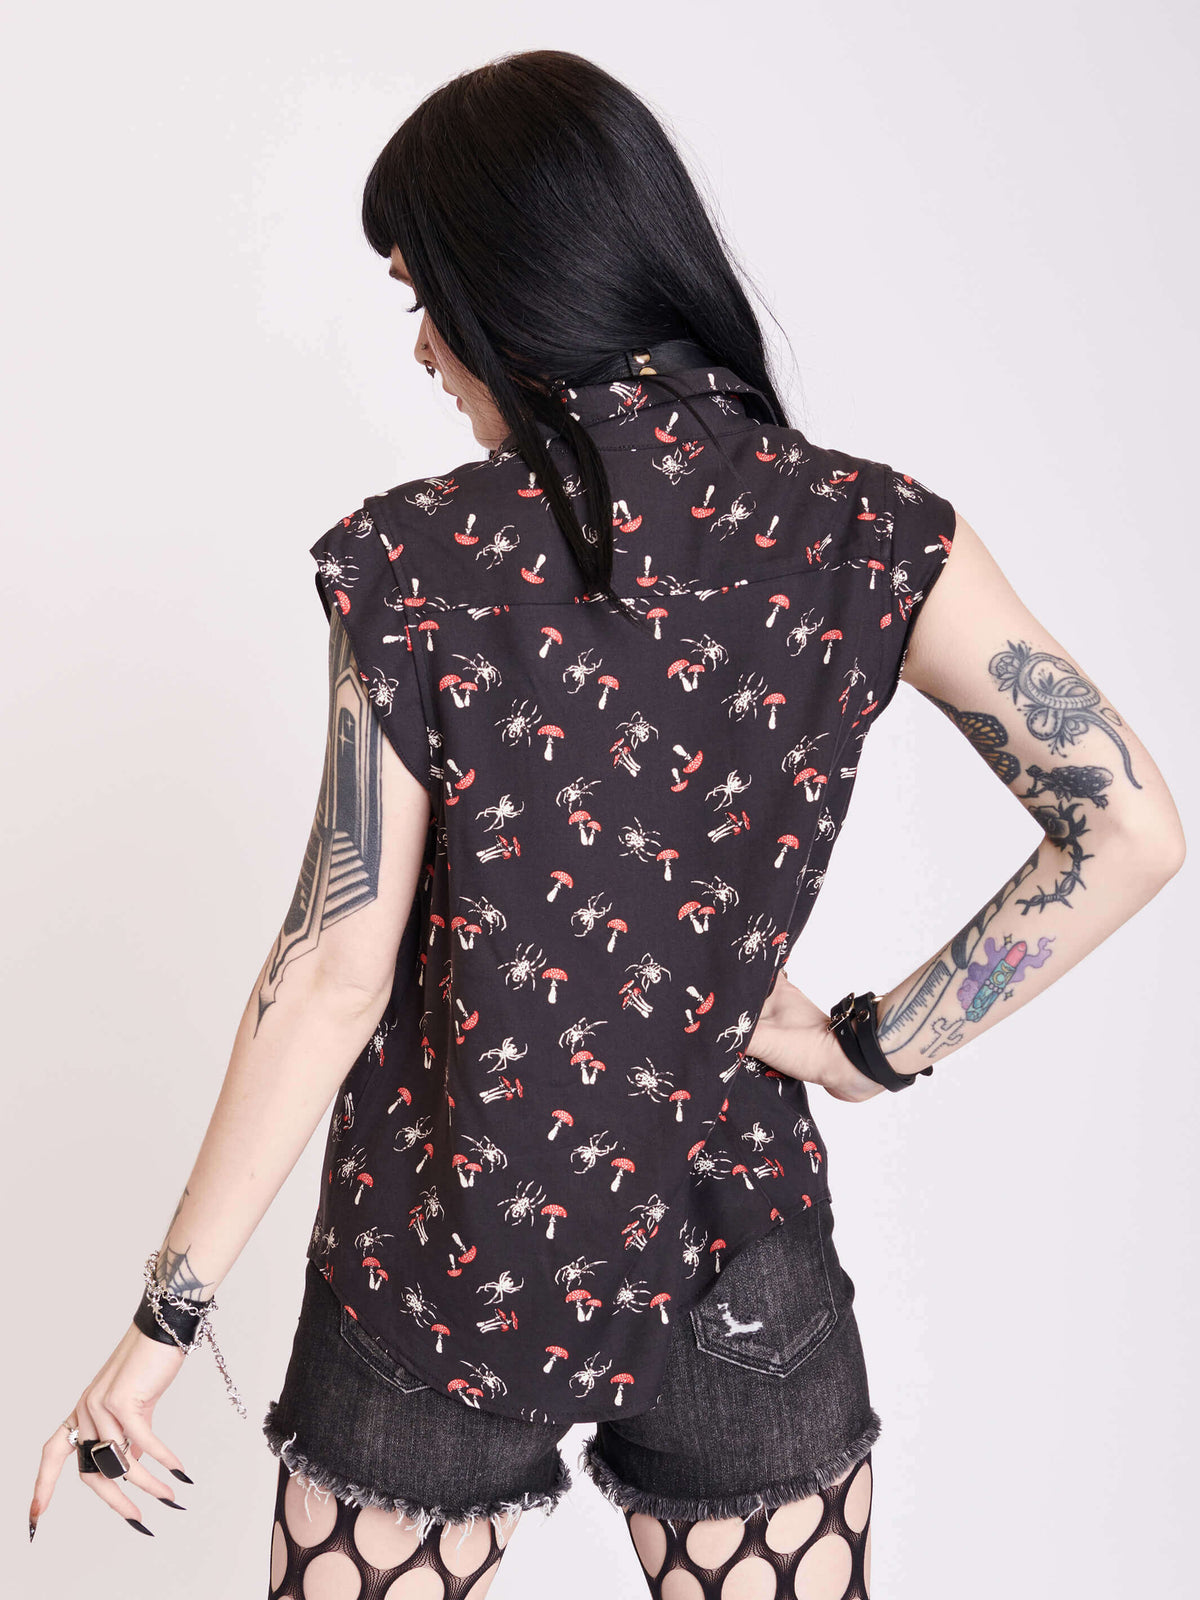 black sleevless button up top with scorpian and mushroom print